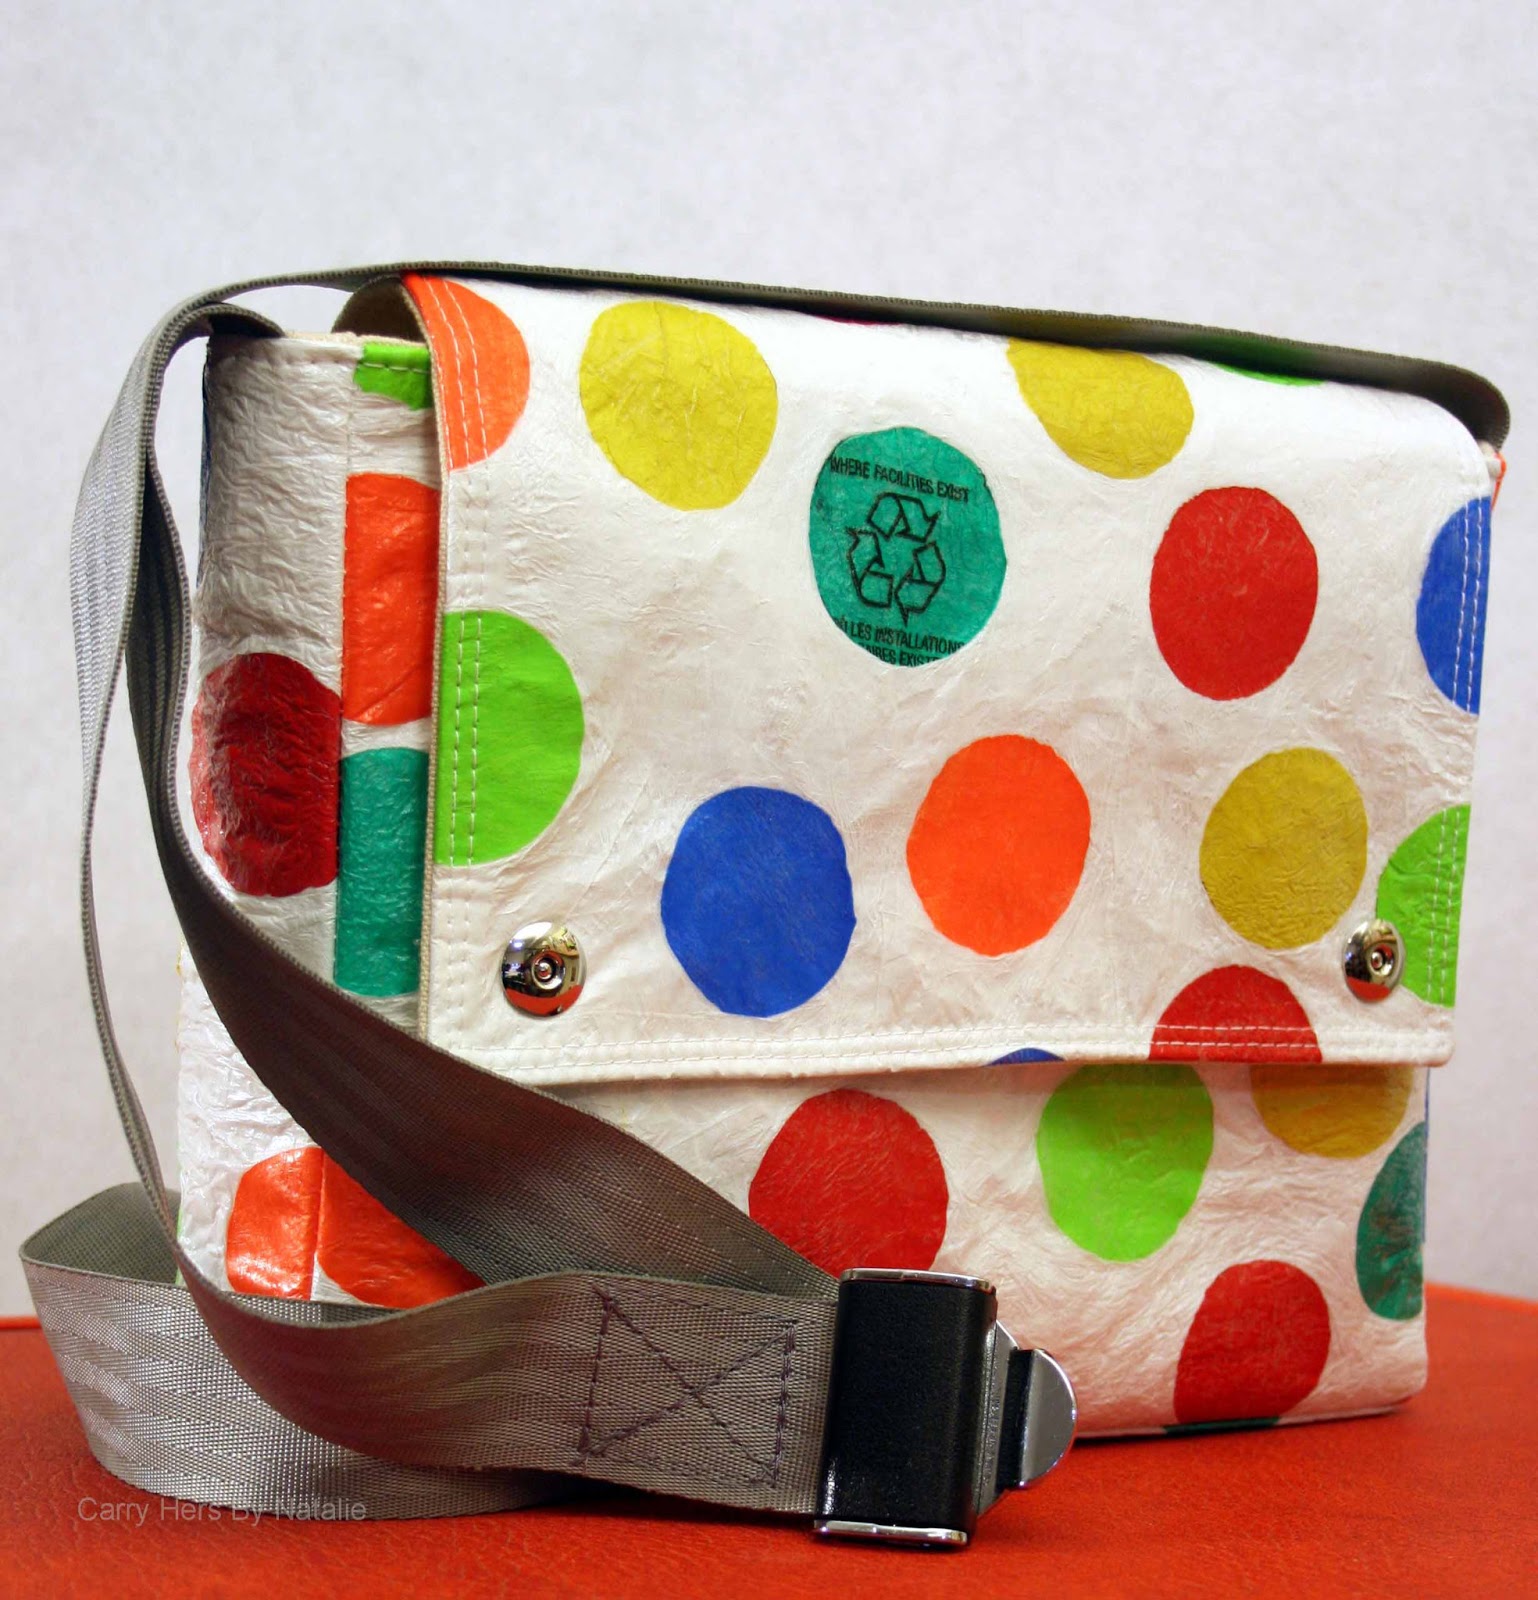 Carry Hers By Natalie: Fused Plastic = Plastic Fabric